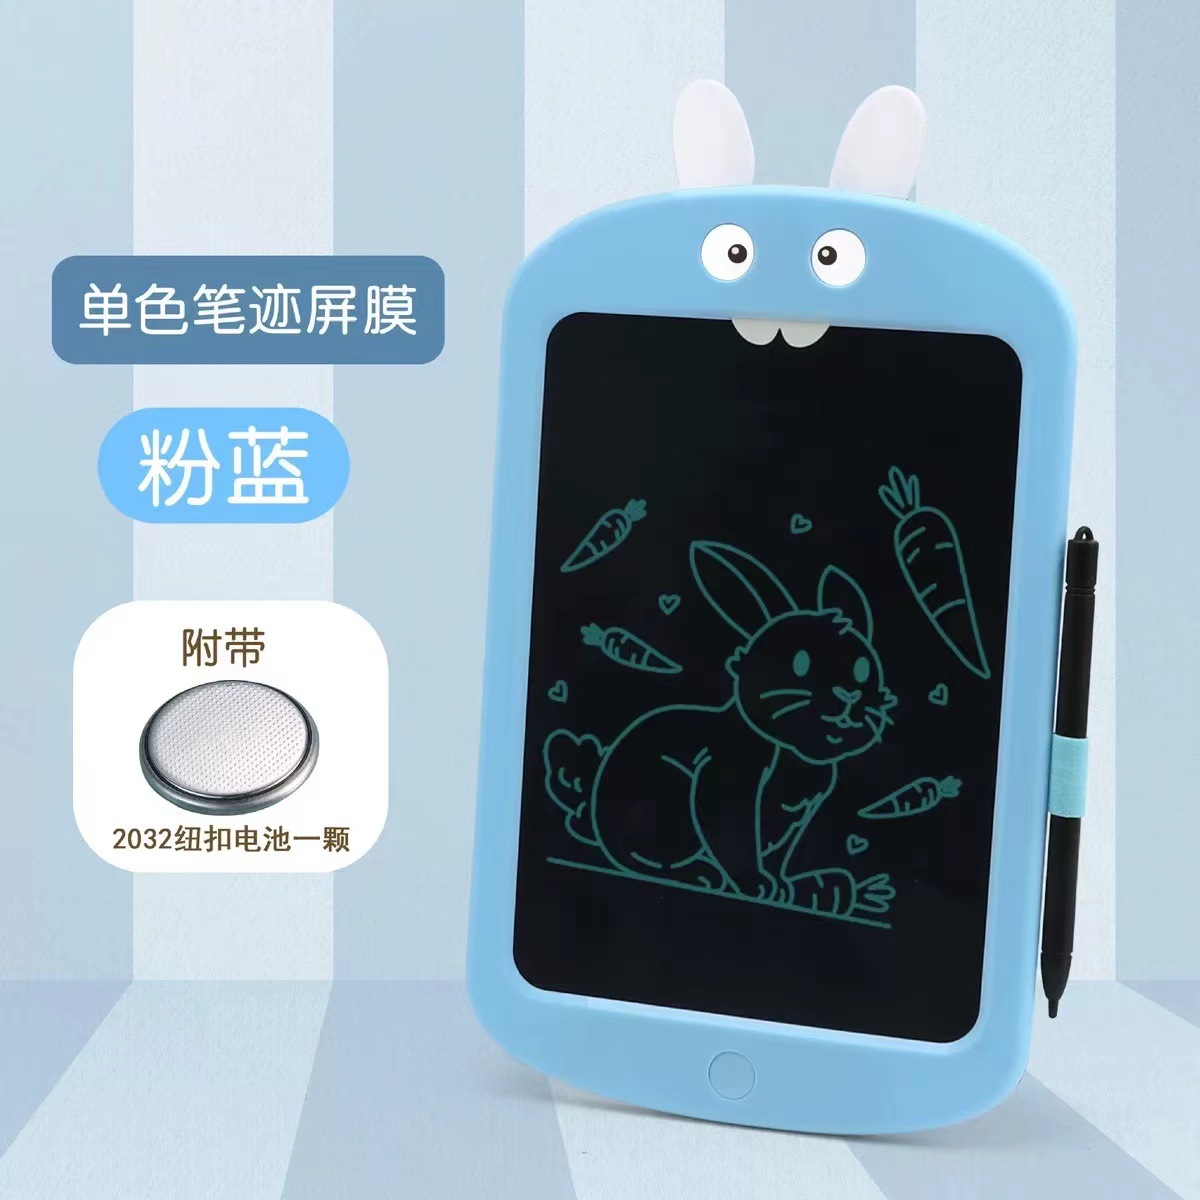 Children's Drawing Board LCD Blackboard Cartoon Color Painting Graffiti Puzzle Toy Tablet Children's Toys